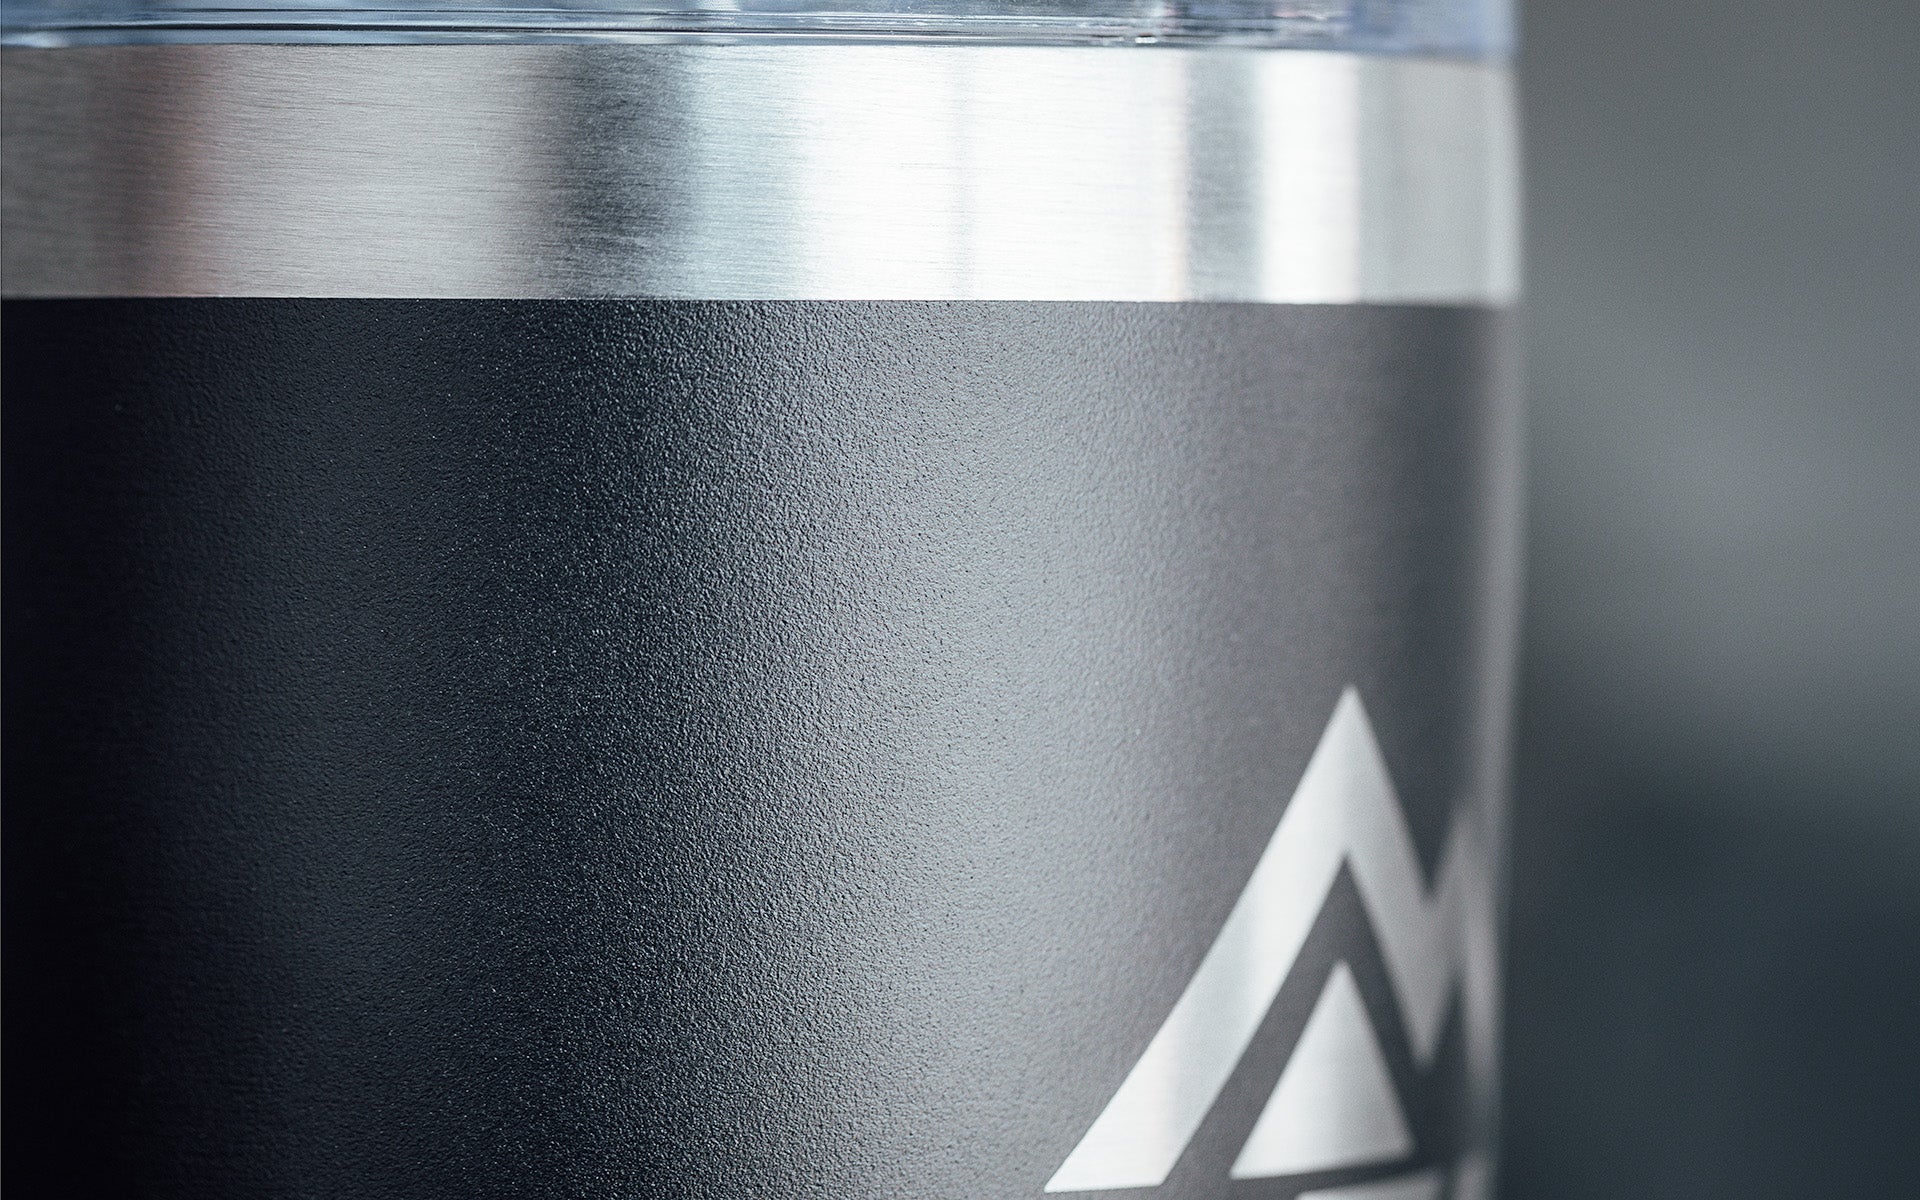 REP Tumbler - close up of Stainless steel and tumbler finish